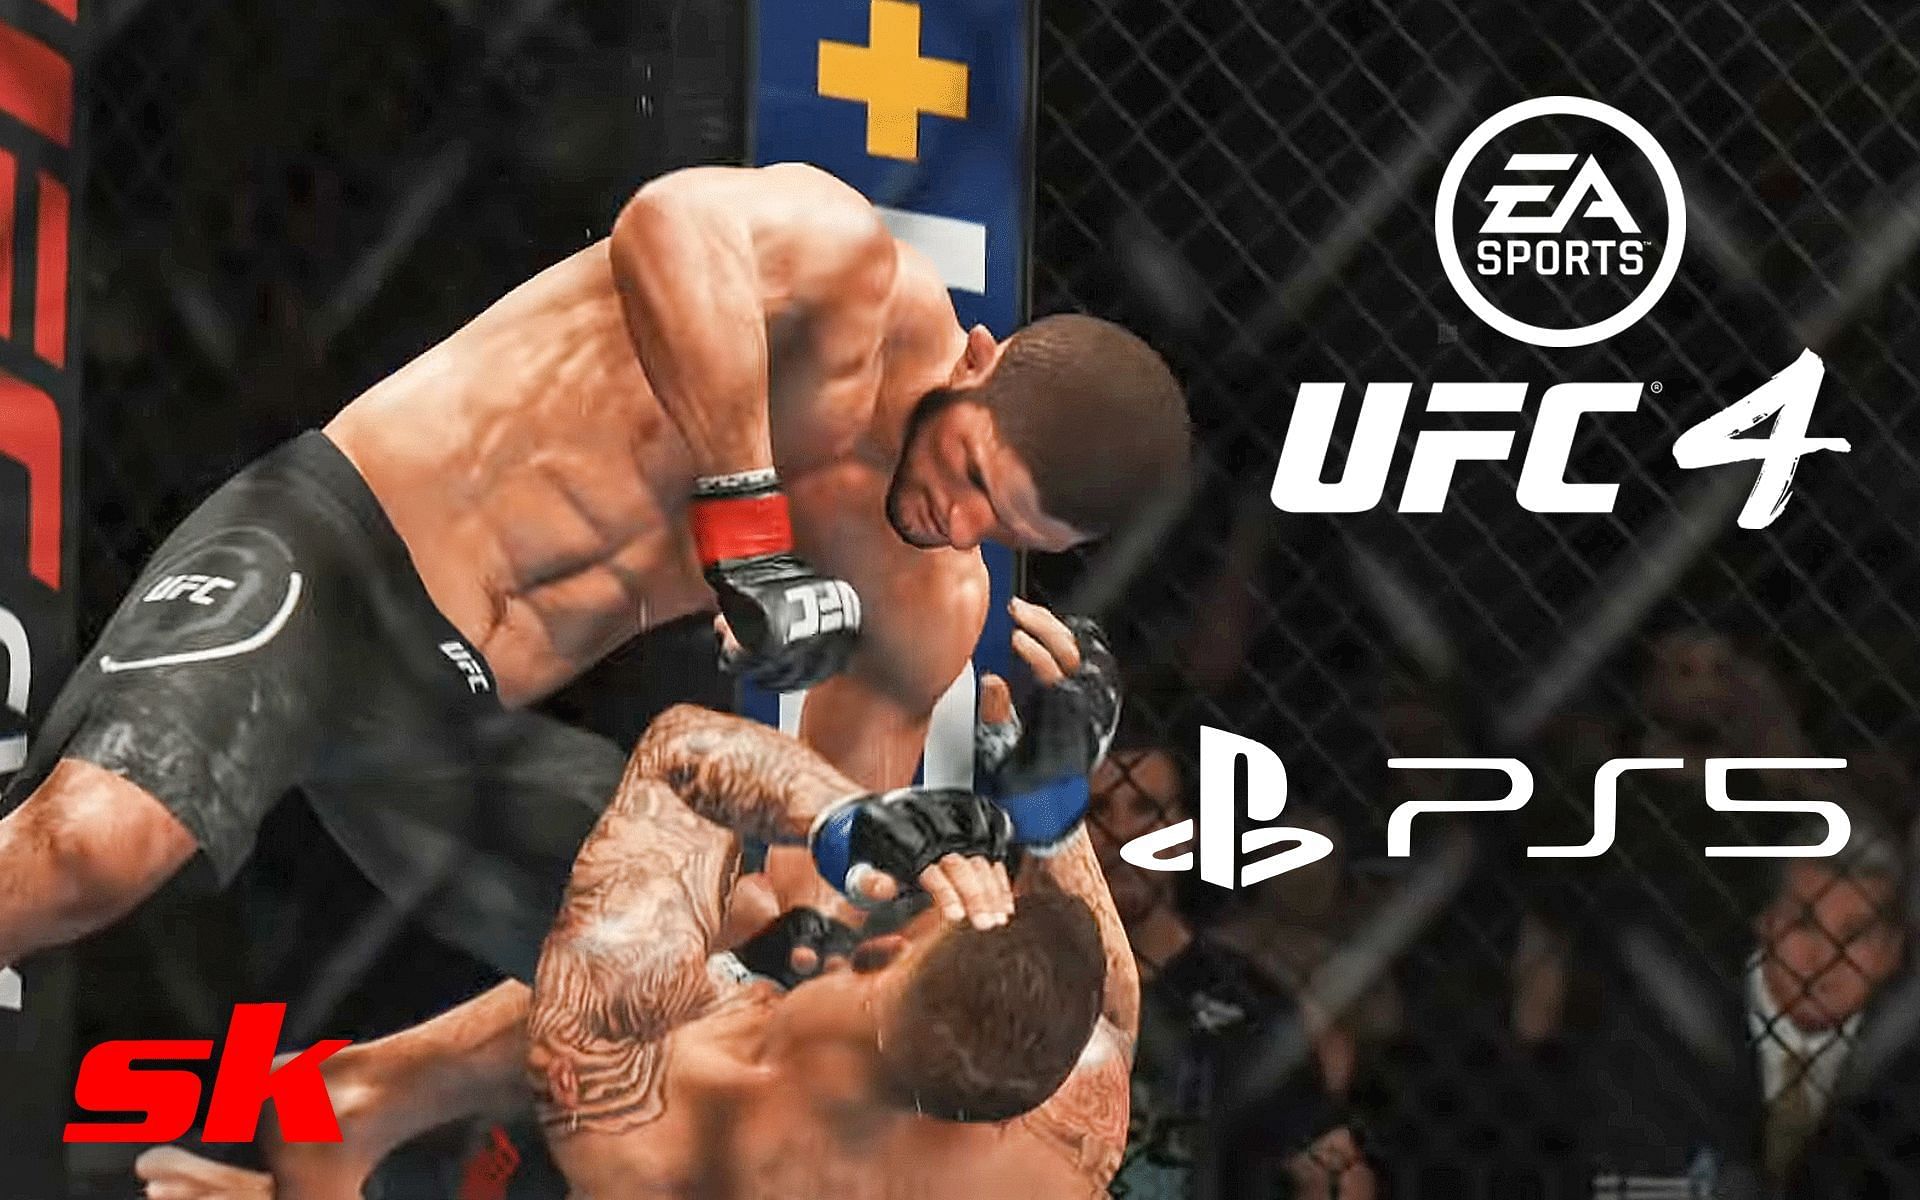 UFC 4 [Image credits: @easportsufc on Instagram, @teamrpd on Twitter and @EASportsUFC on YouTube] 